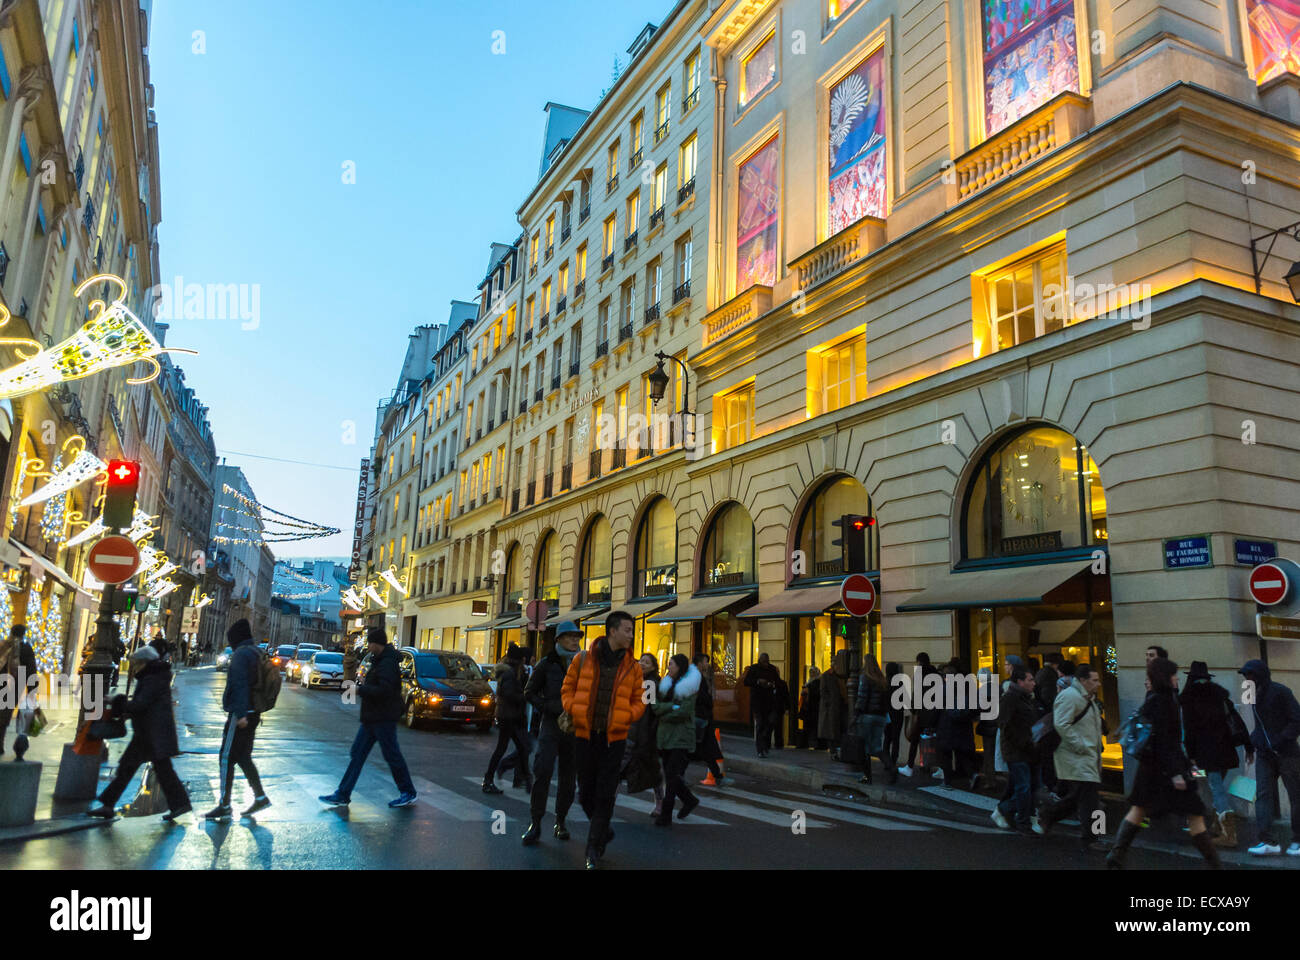 Paris, France, People Christmas Shopping, Outside Street Scenes, Exterior,  Evening Light, Rue Royale, Luxury shop fronts Stock Photo - Alamy